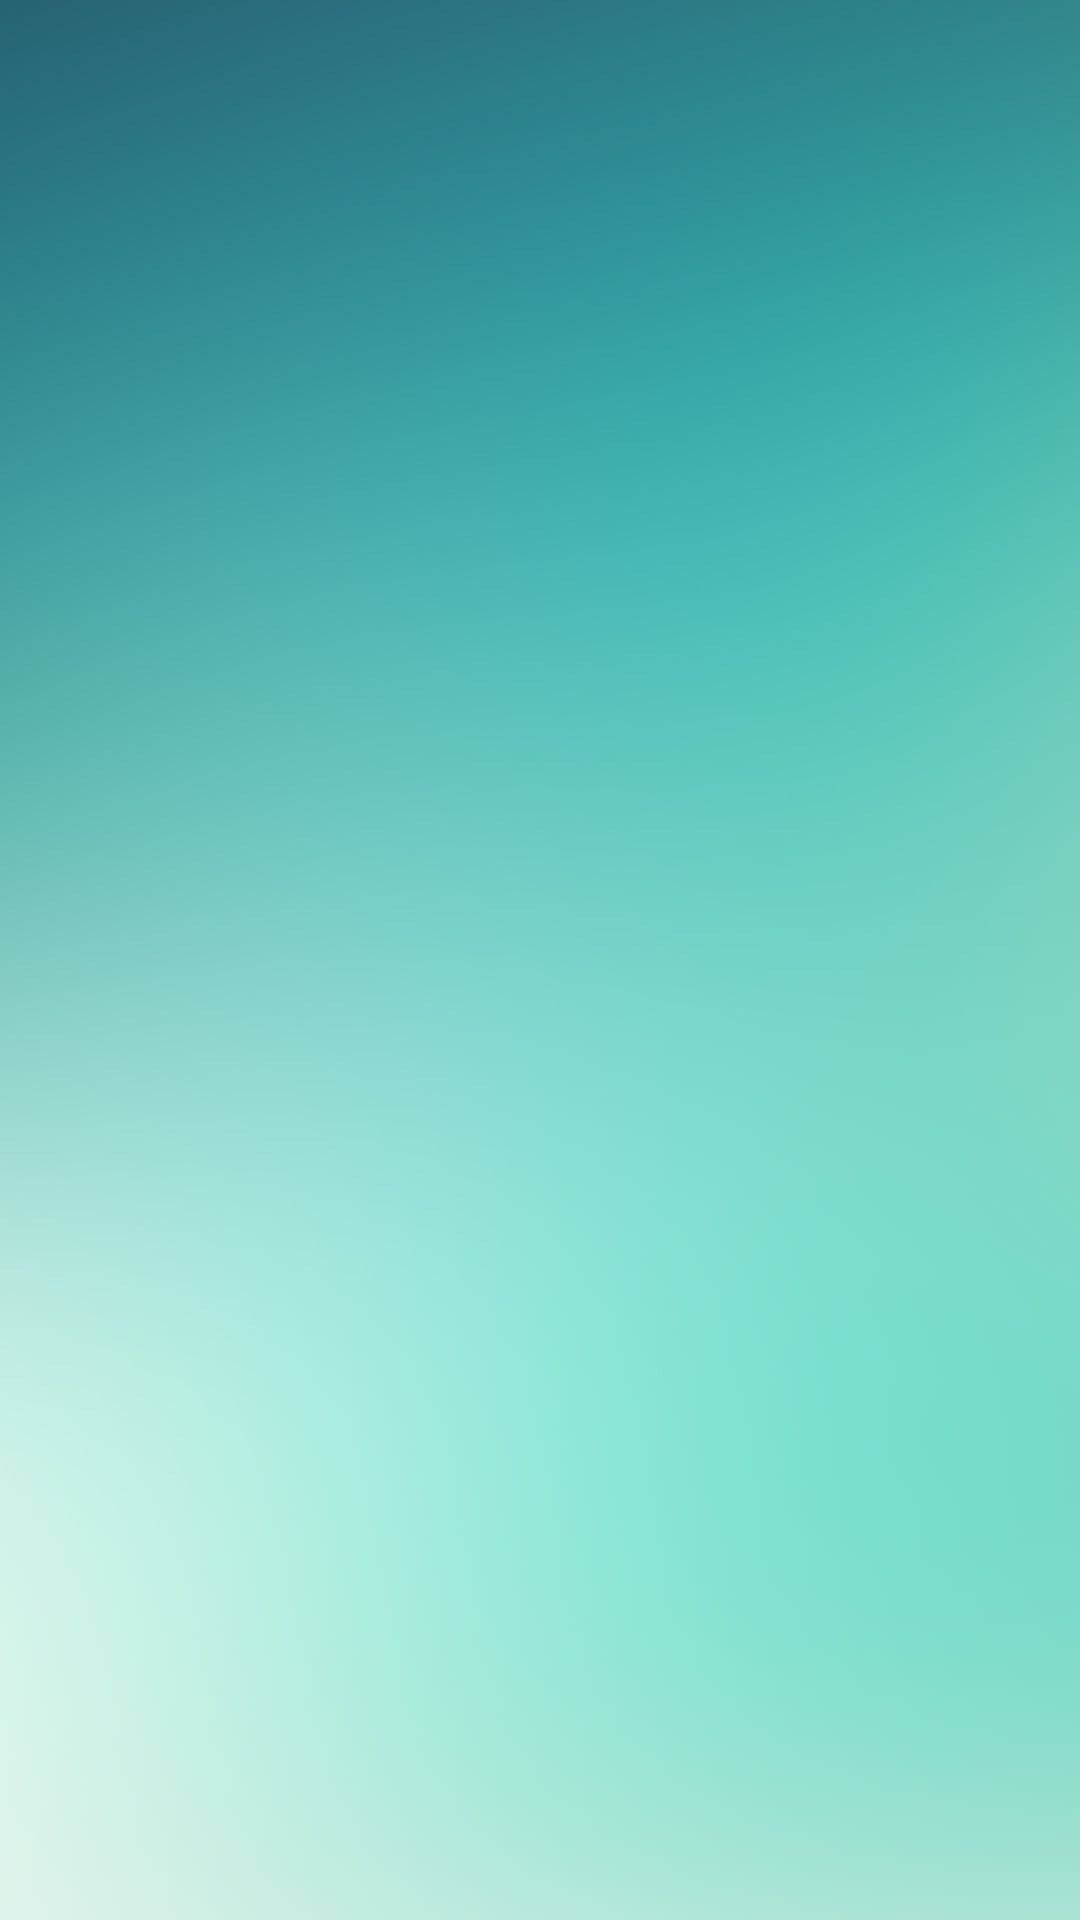 Cyan And Turquoise Color Iphone Wallpaper